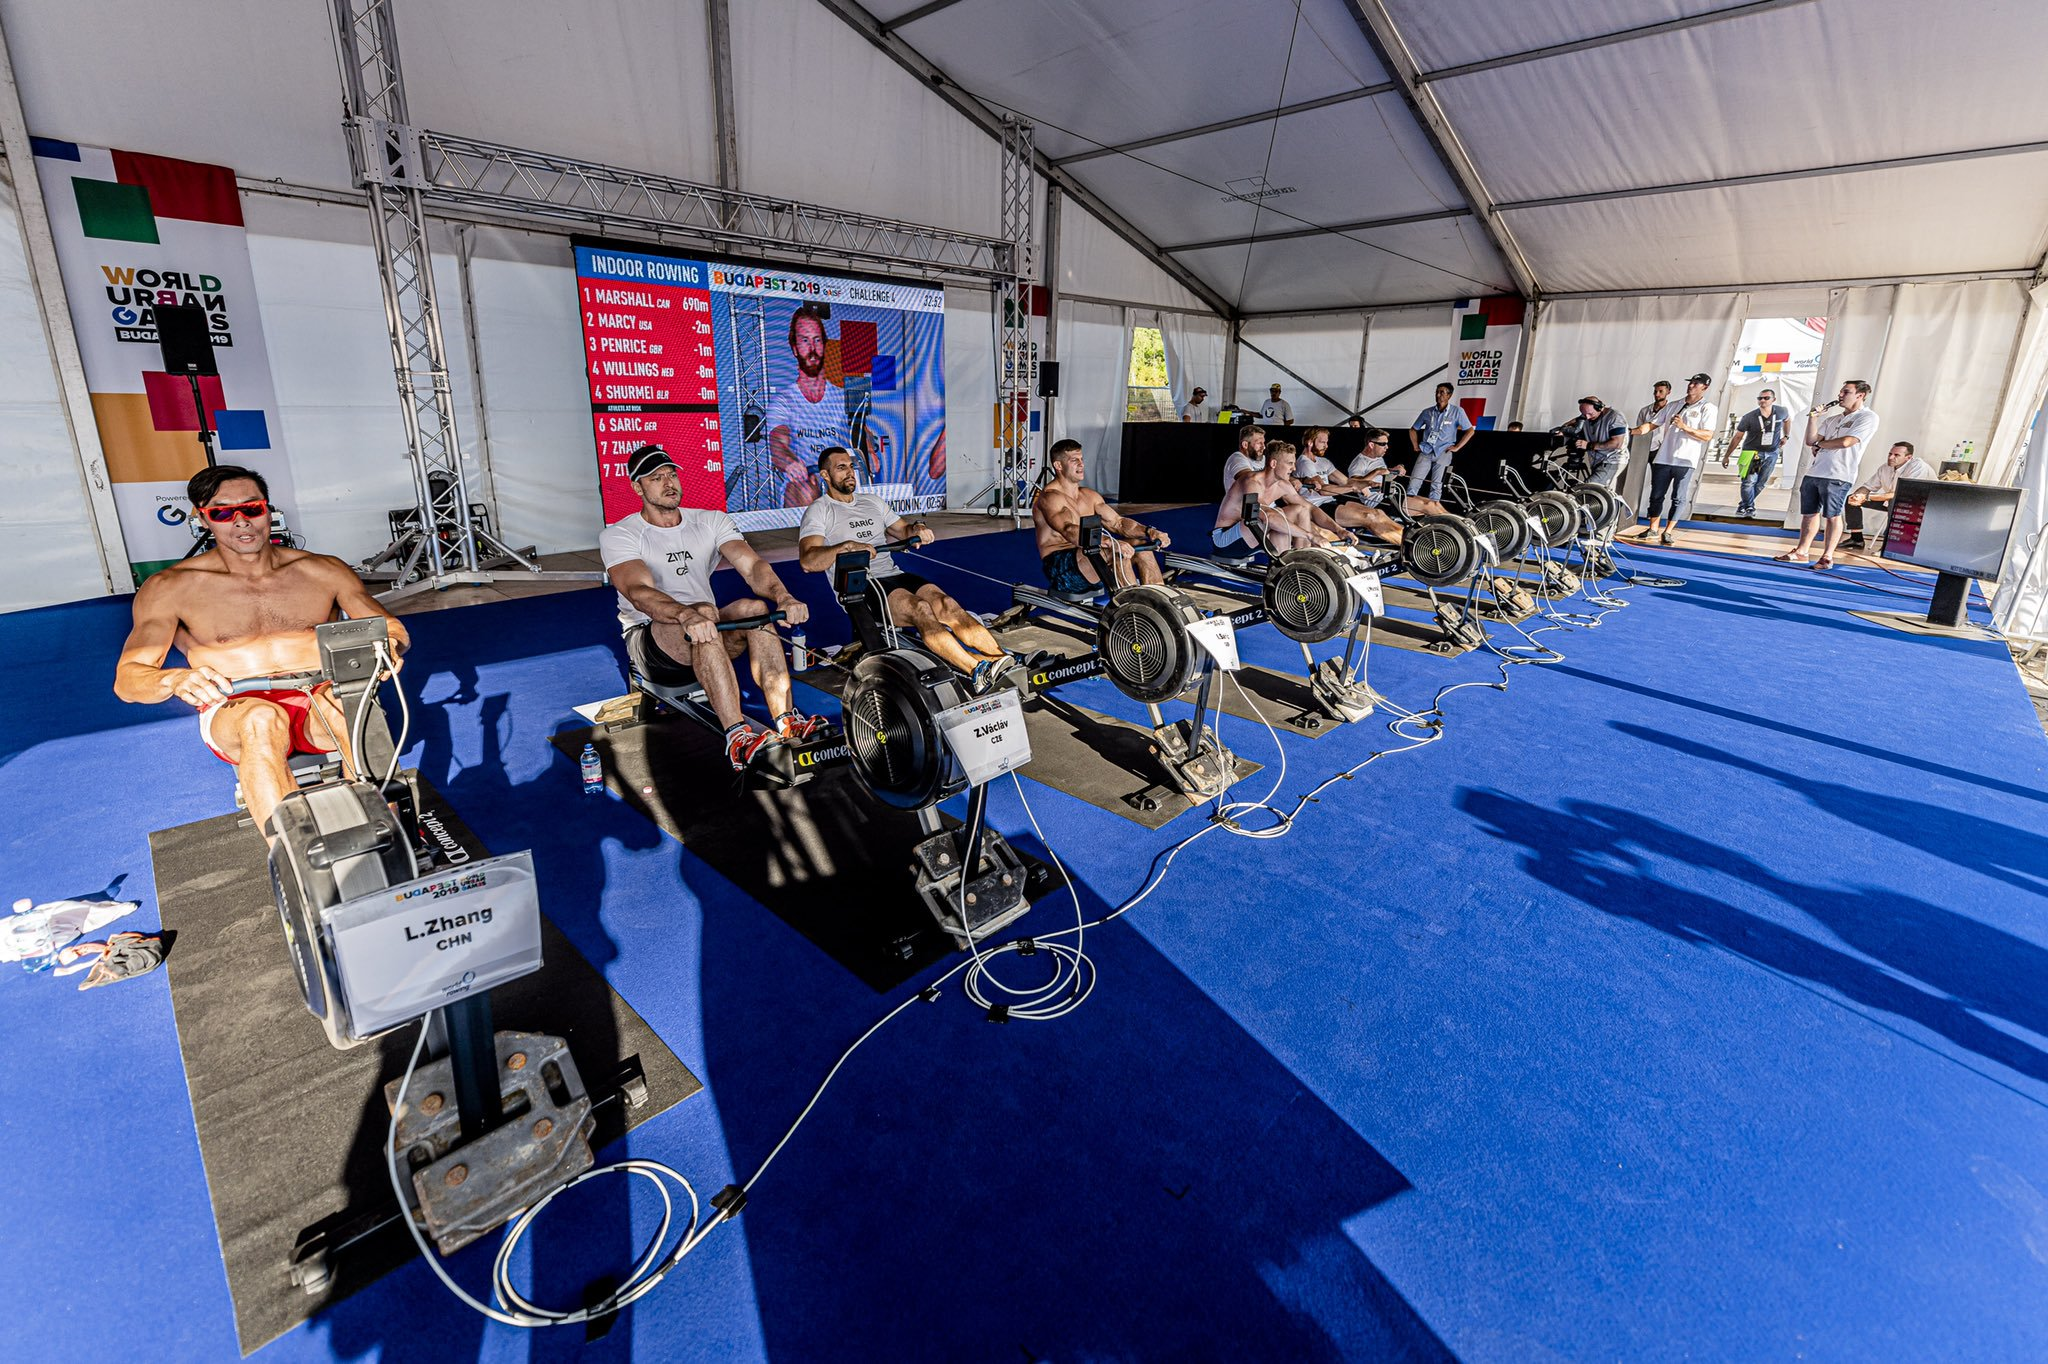 Indoor rowing continued to be showcased ©WUG Budapest